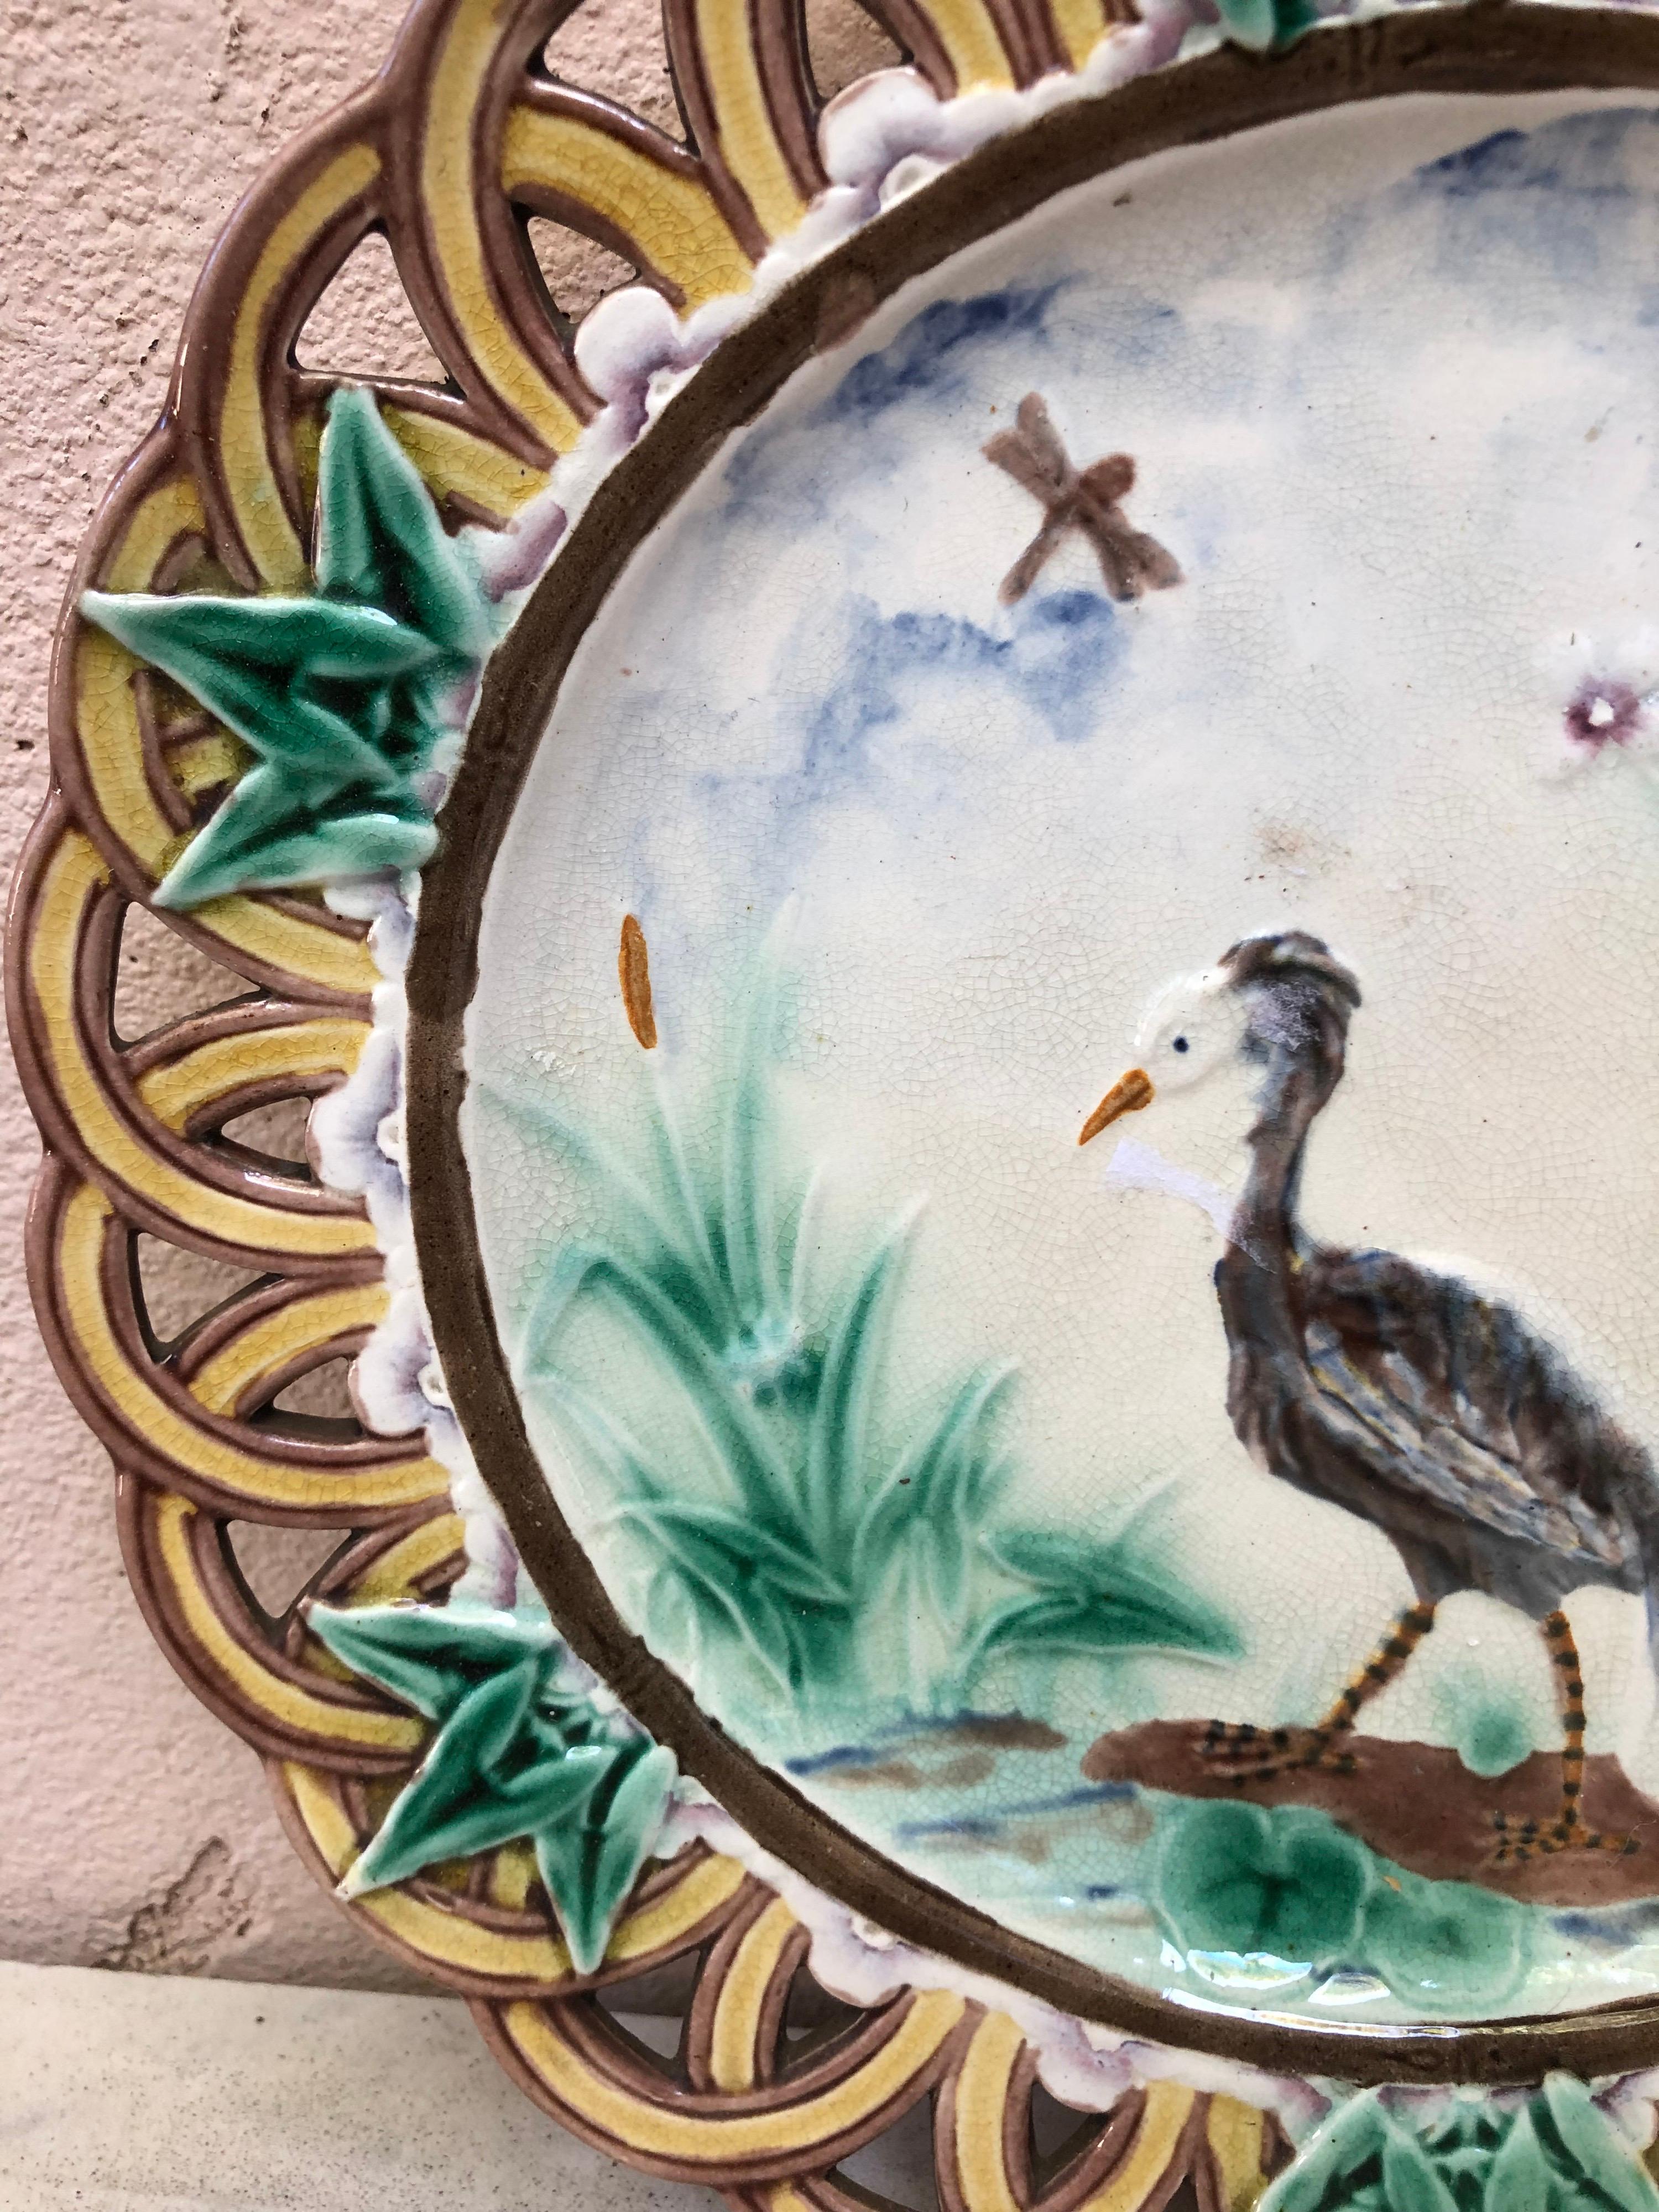 A fine Victorian Majolica reticulated plate signed Wedgwood.
The border is decorated with ivy leaves, the centre is a landscape with a heron near a pond.